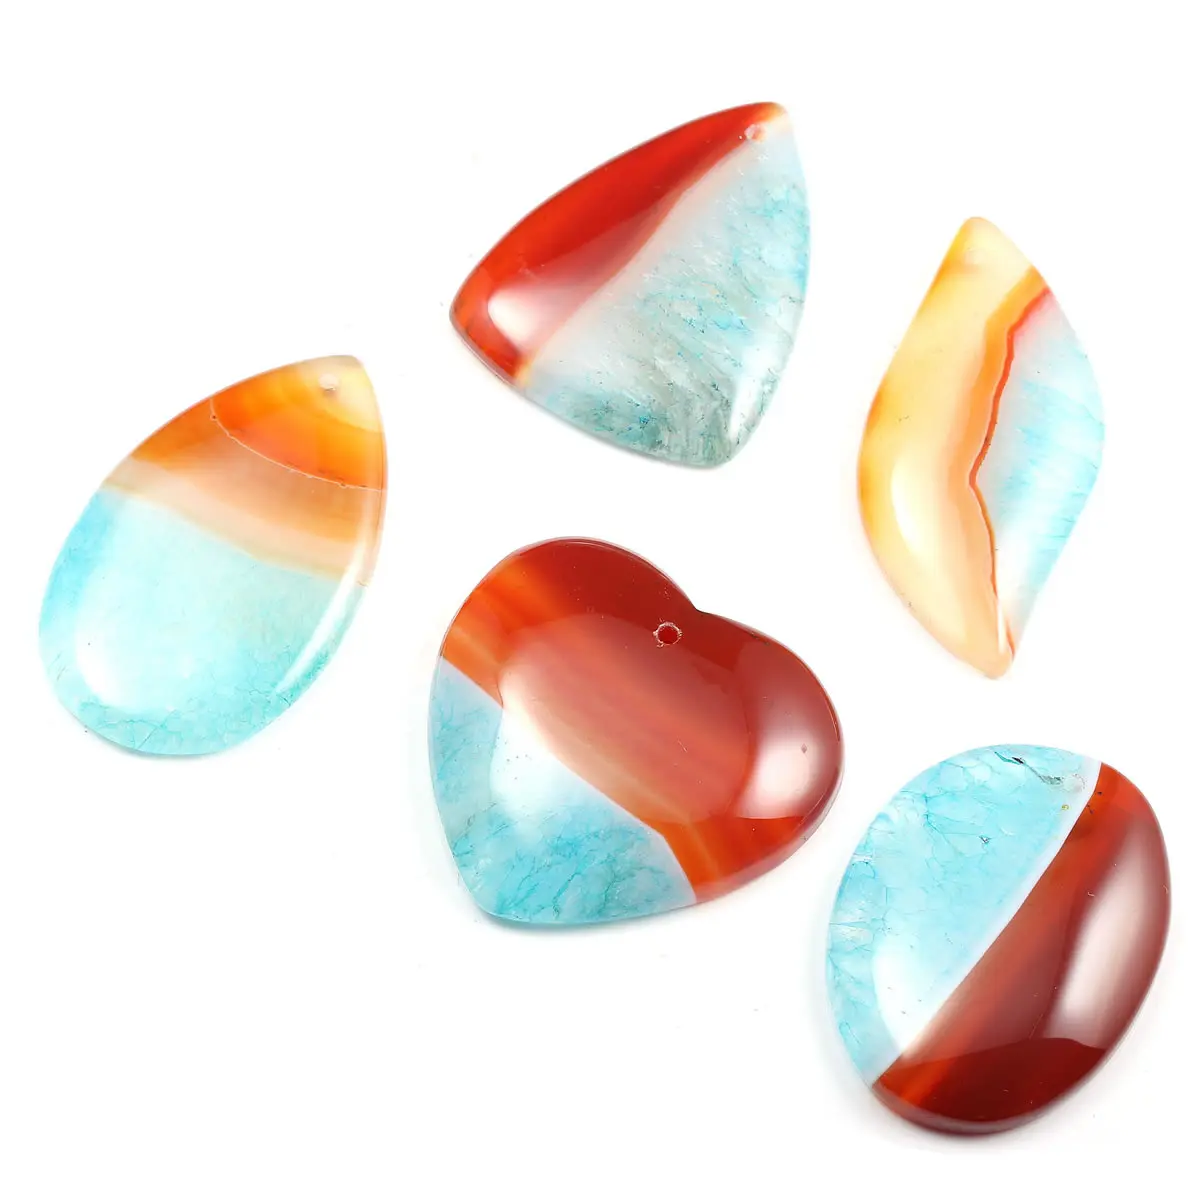 

5pcs / Lot Natural Red Blue Striped Pendant Reiki Healing Natural Agates Stone Meditation Amulet for Jewelry Necklace Gift